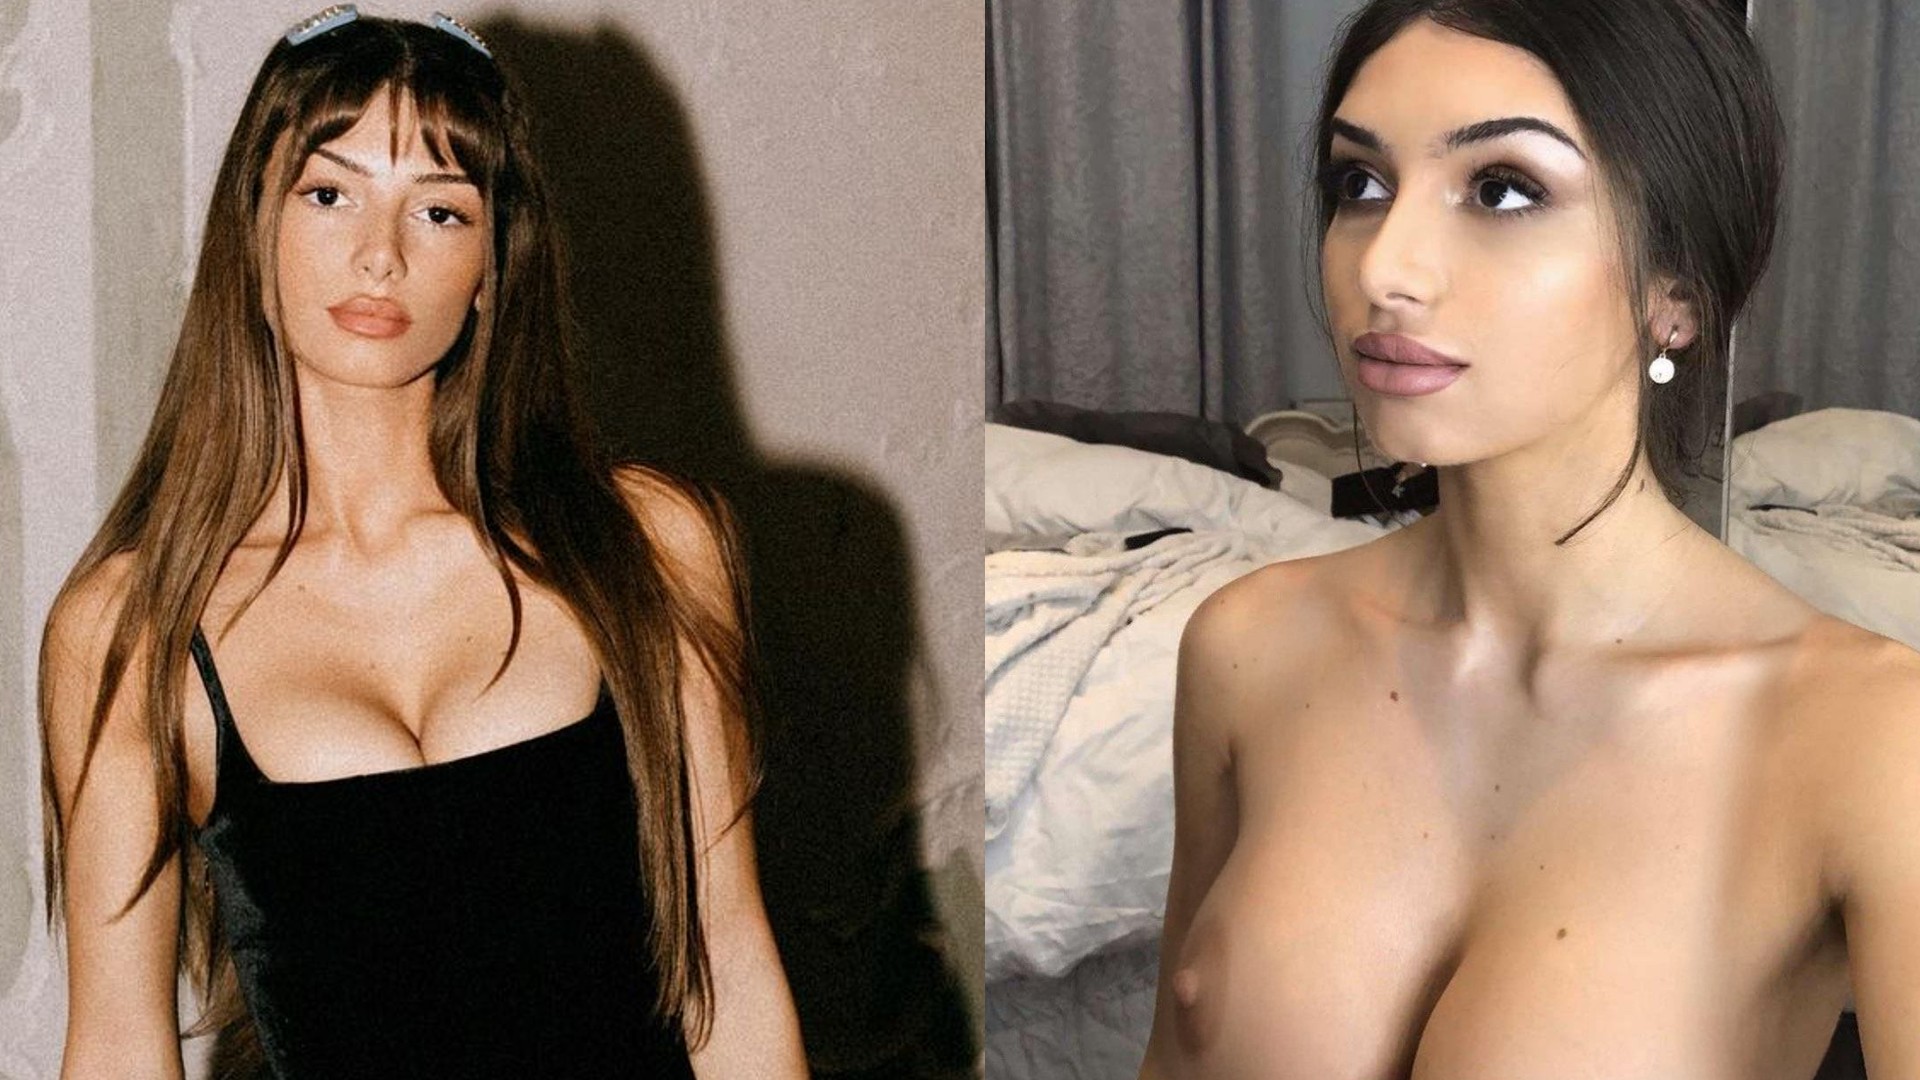 alma spencer recommends mimi keene nudes pic